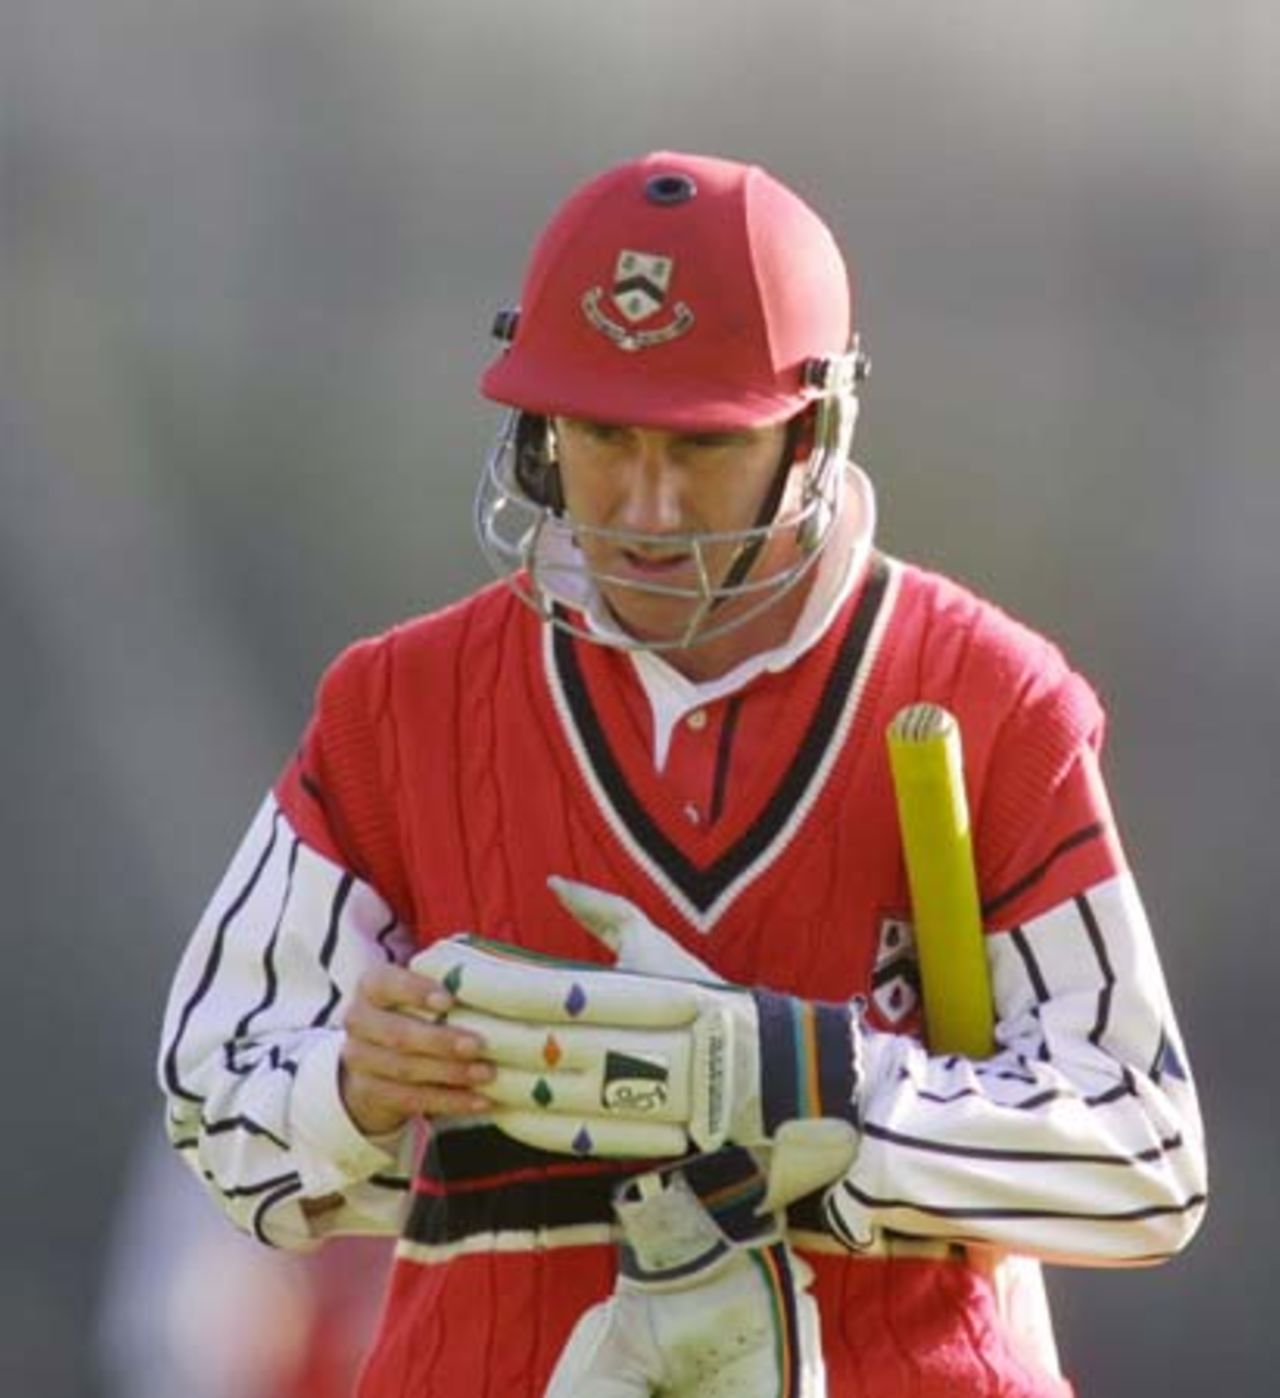 Canterbury captain and batsman Gary Stead walks off the field after being caught at square leg by Central Districts fielder Ben Smith off the bowling of Brent Hefford for 2. 2nd Shell Cup Final: Canterbury v Central Districts at Jade Stadium, Christchurch, 27 January 2001.